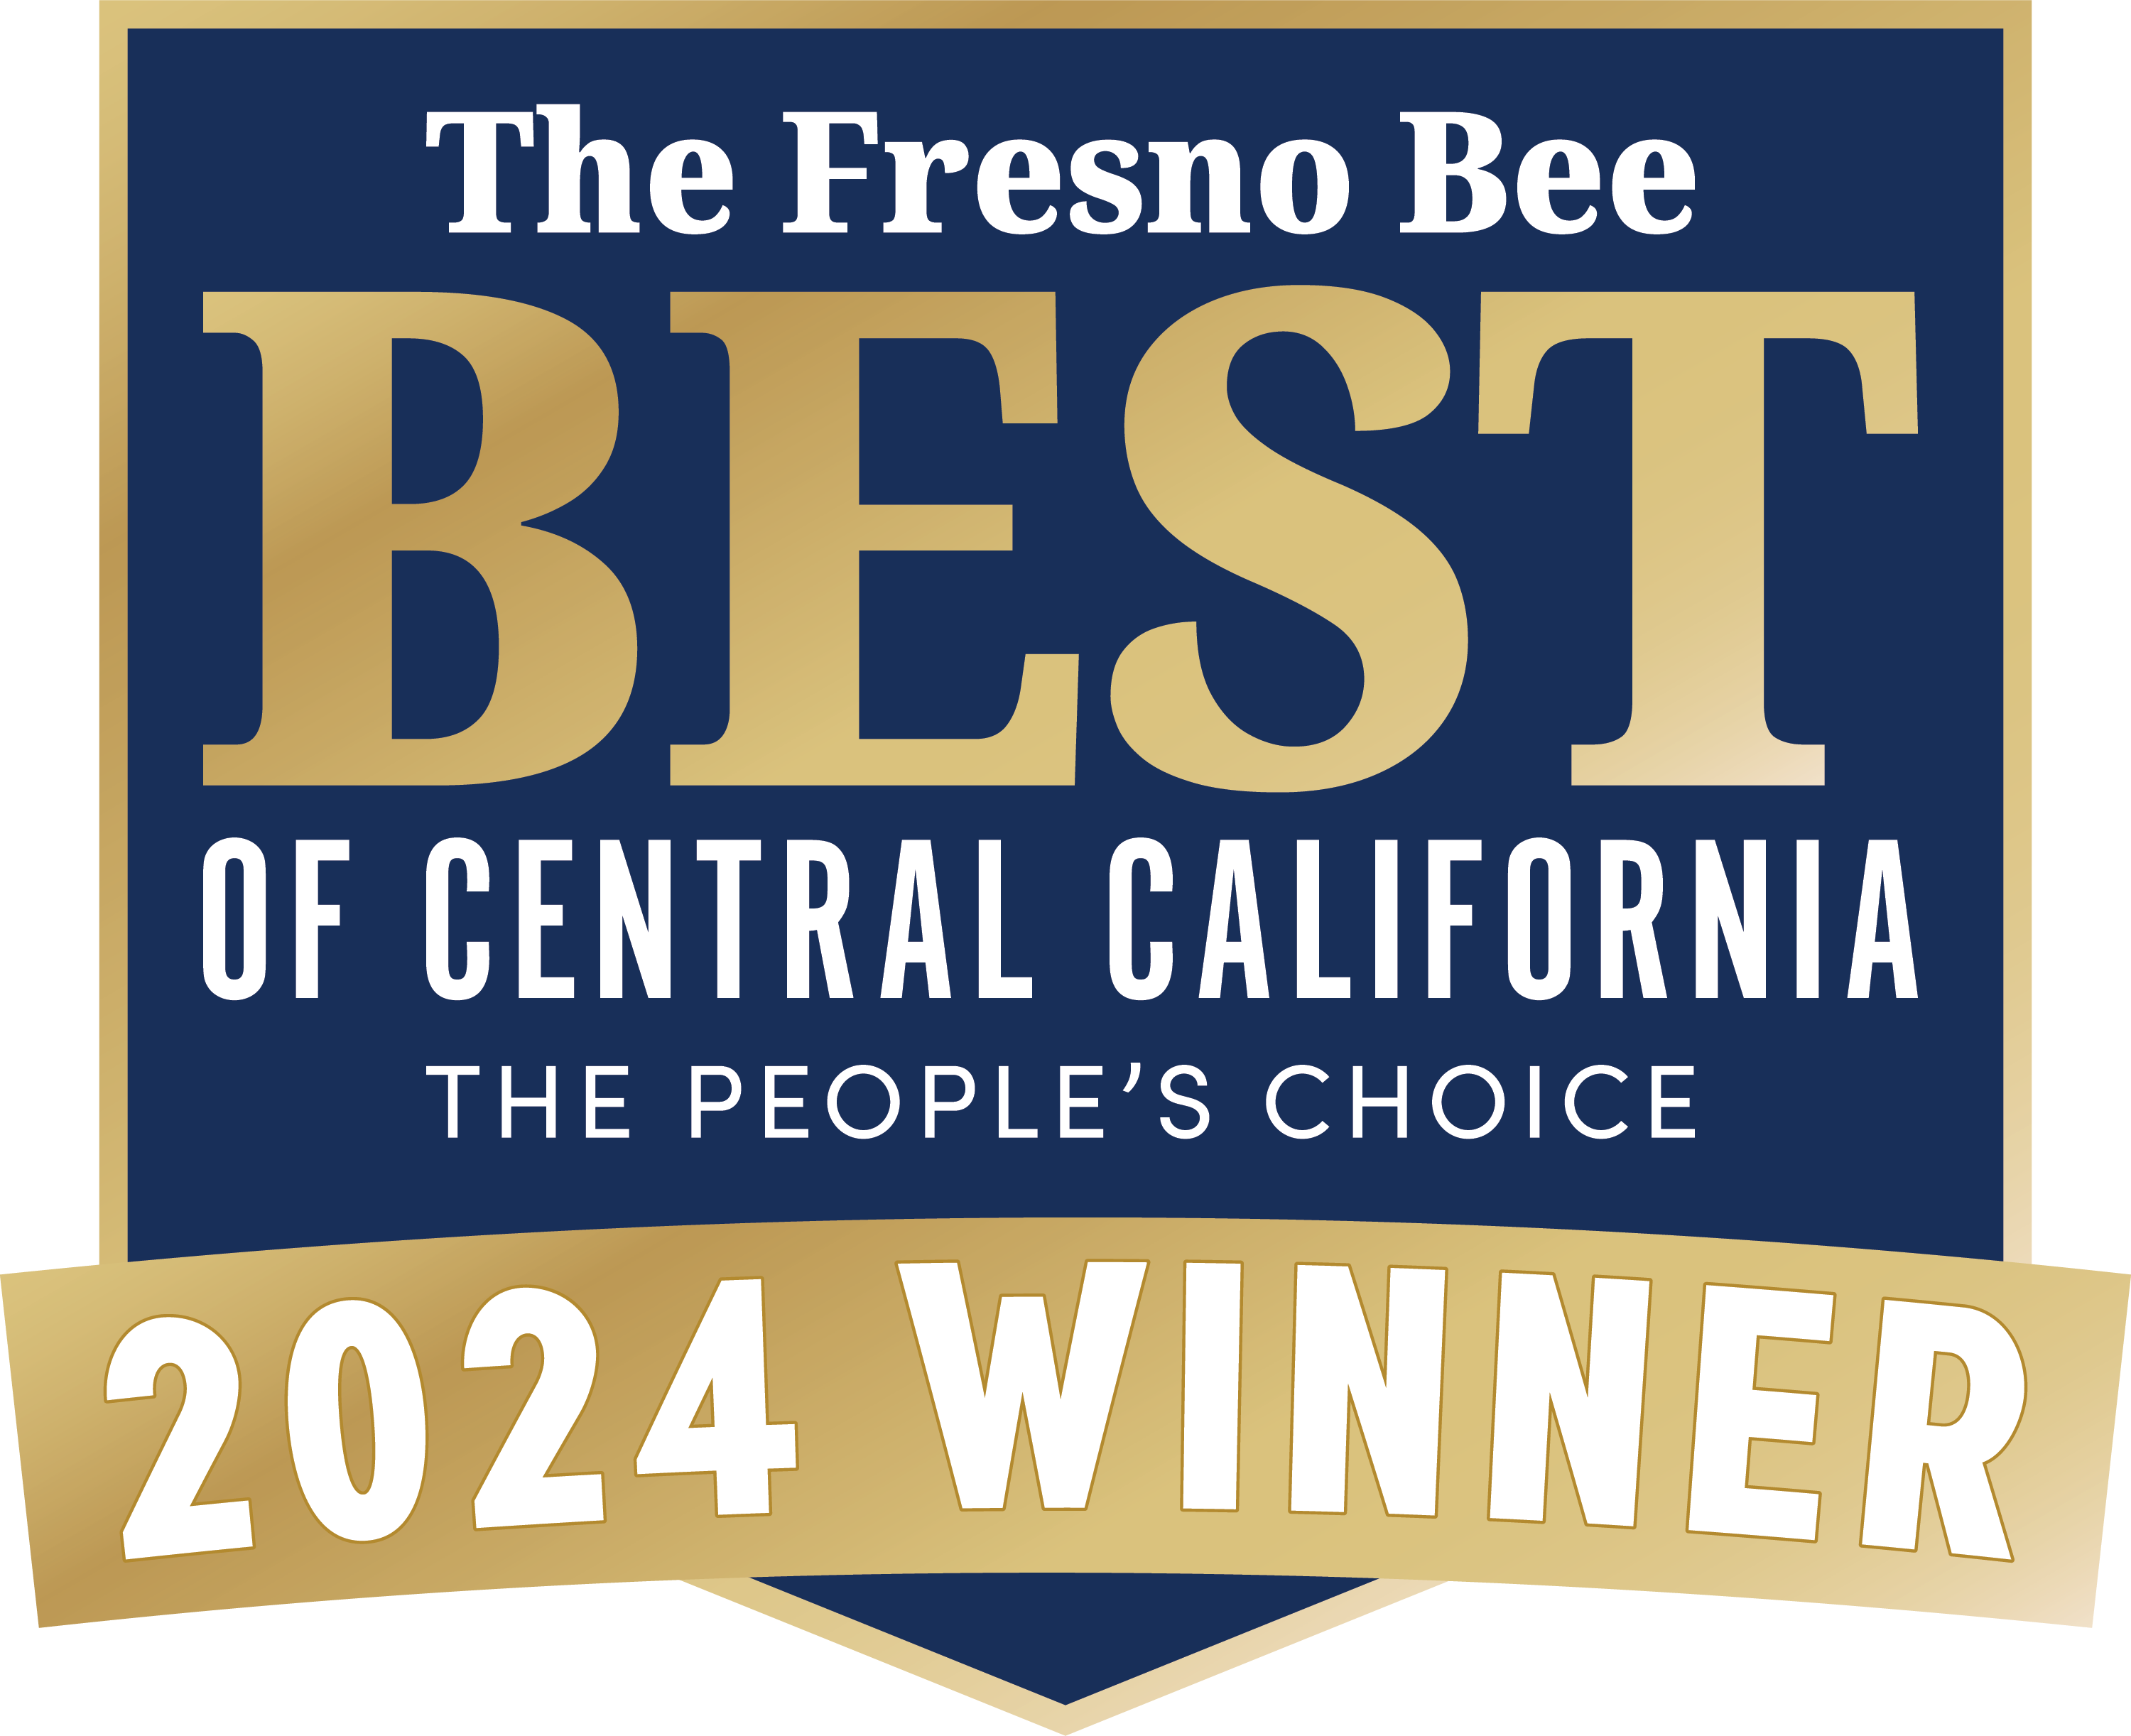 The Fresno Bee best of Central California. The people's choice 2024 winner.